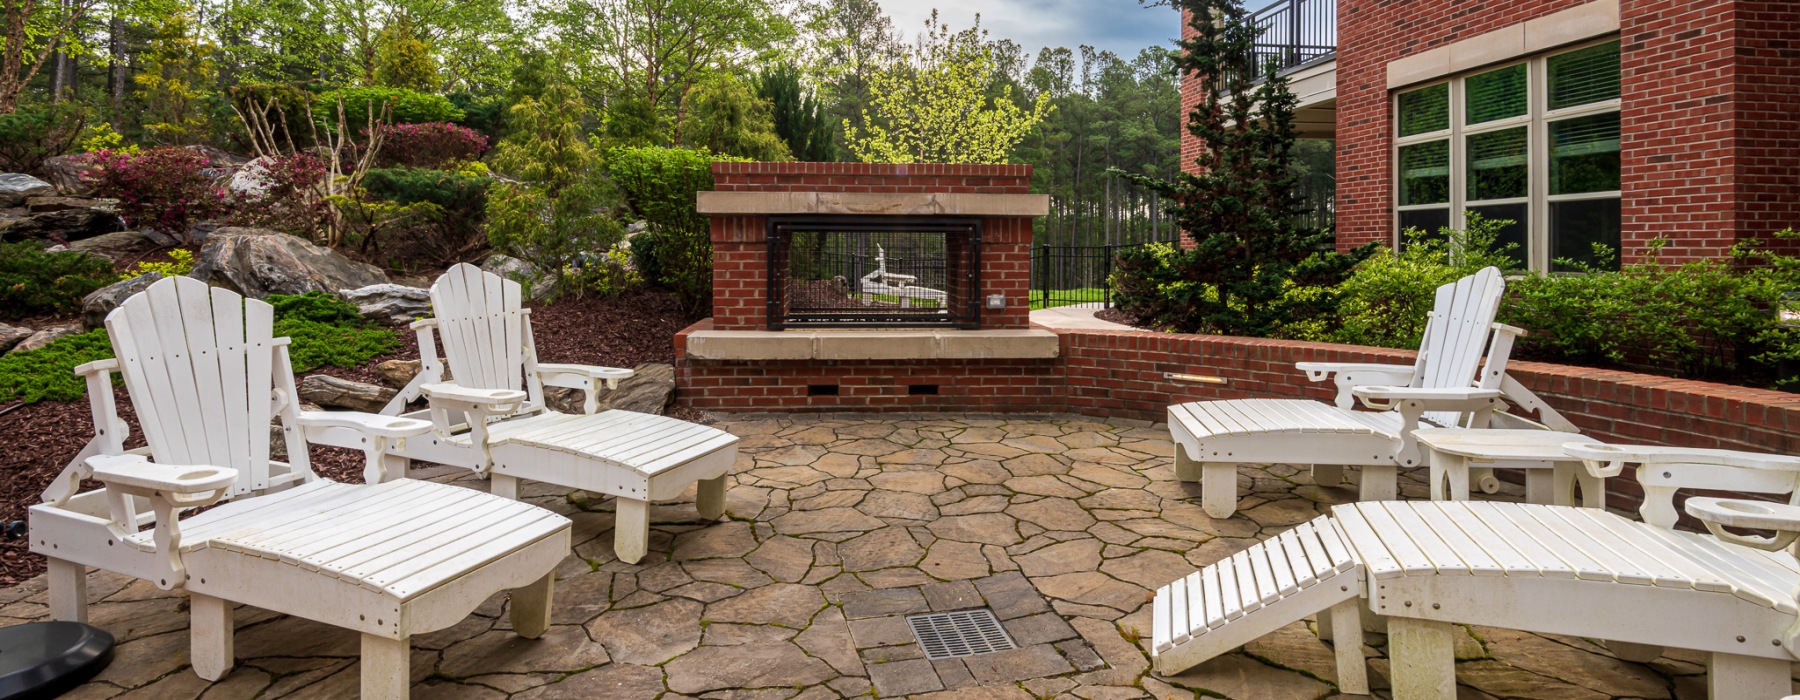 Outdoor courtyard with fireplace